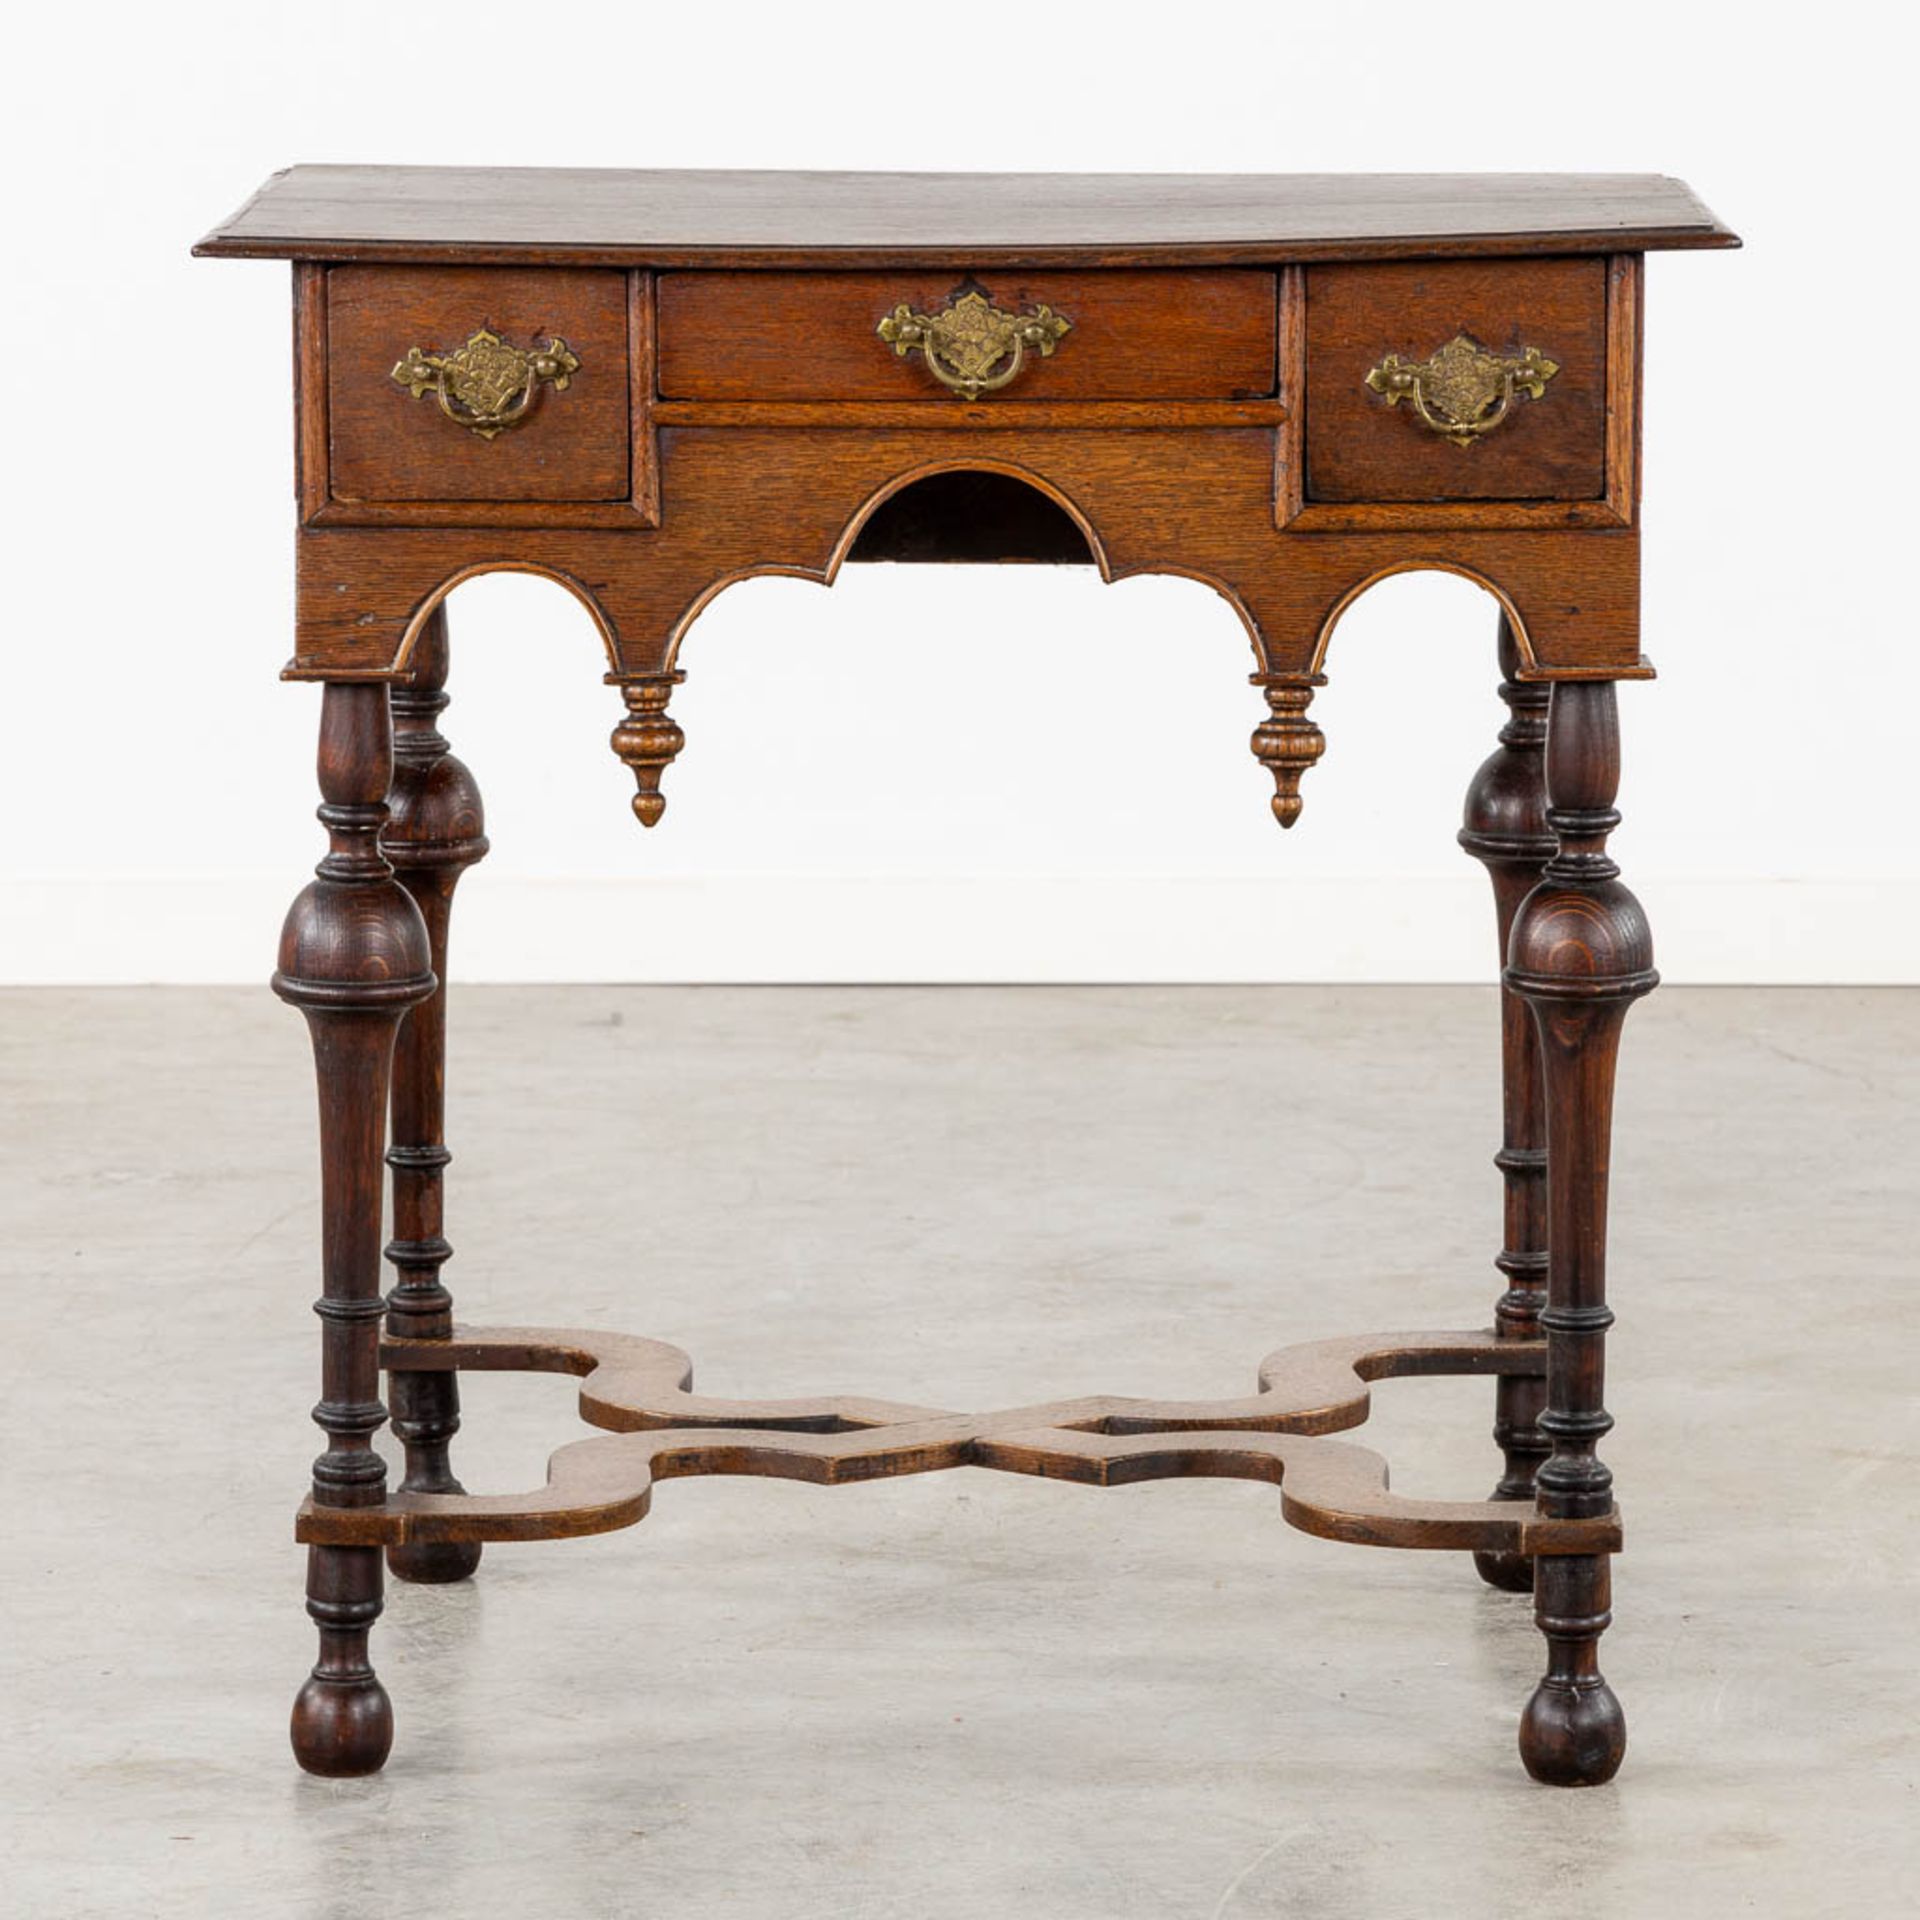 An antique oak 'Pay Table', The Netherlands, 18th C. (L:53 x W:69 x H:70 cm) - Image 4 of 11